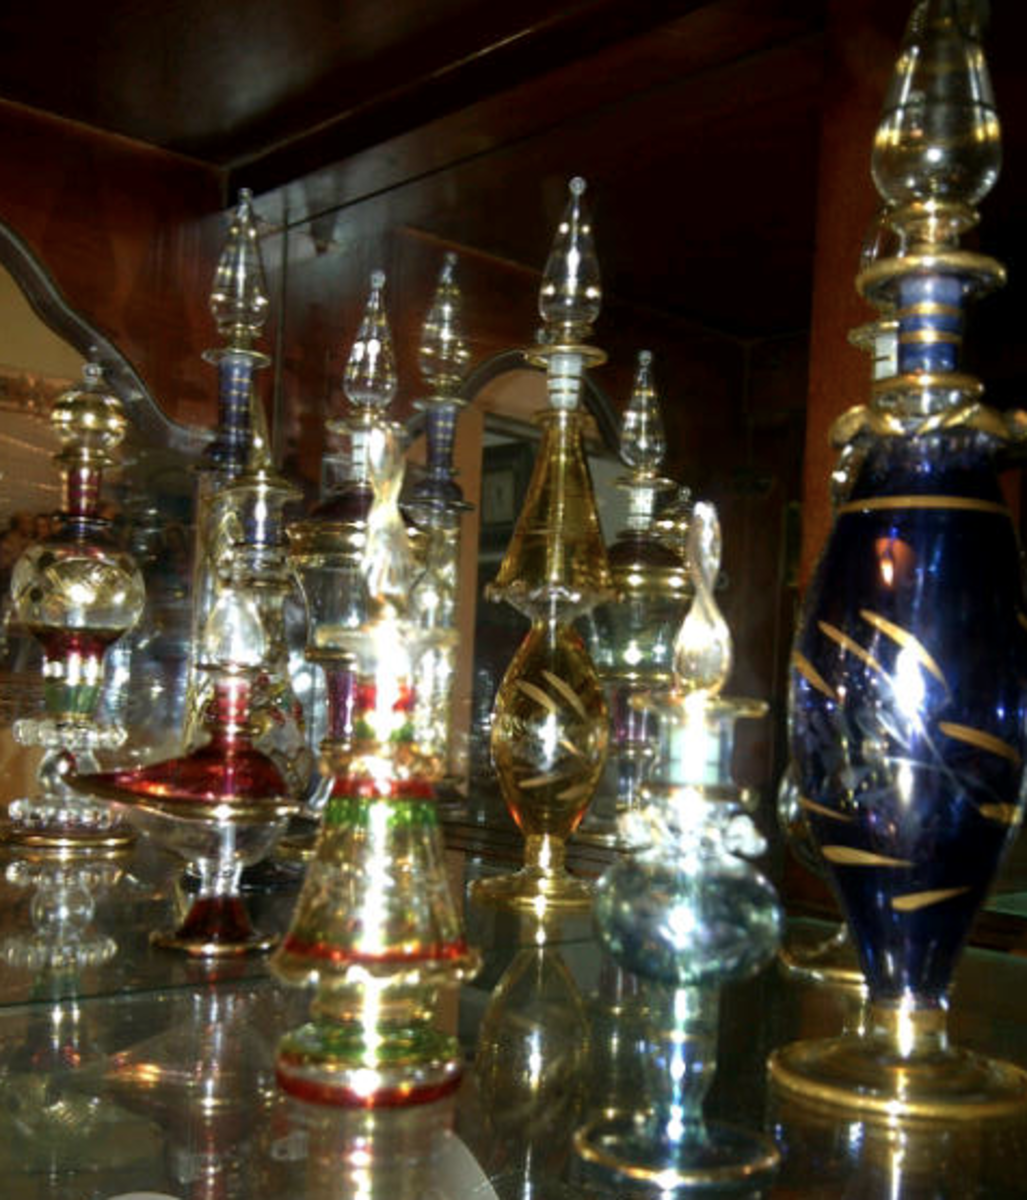 My pretty collection of Egyptian perfume bottles